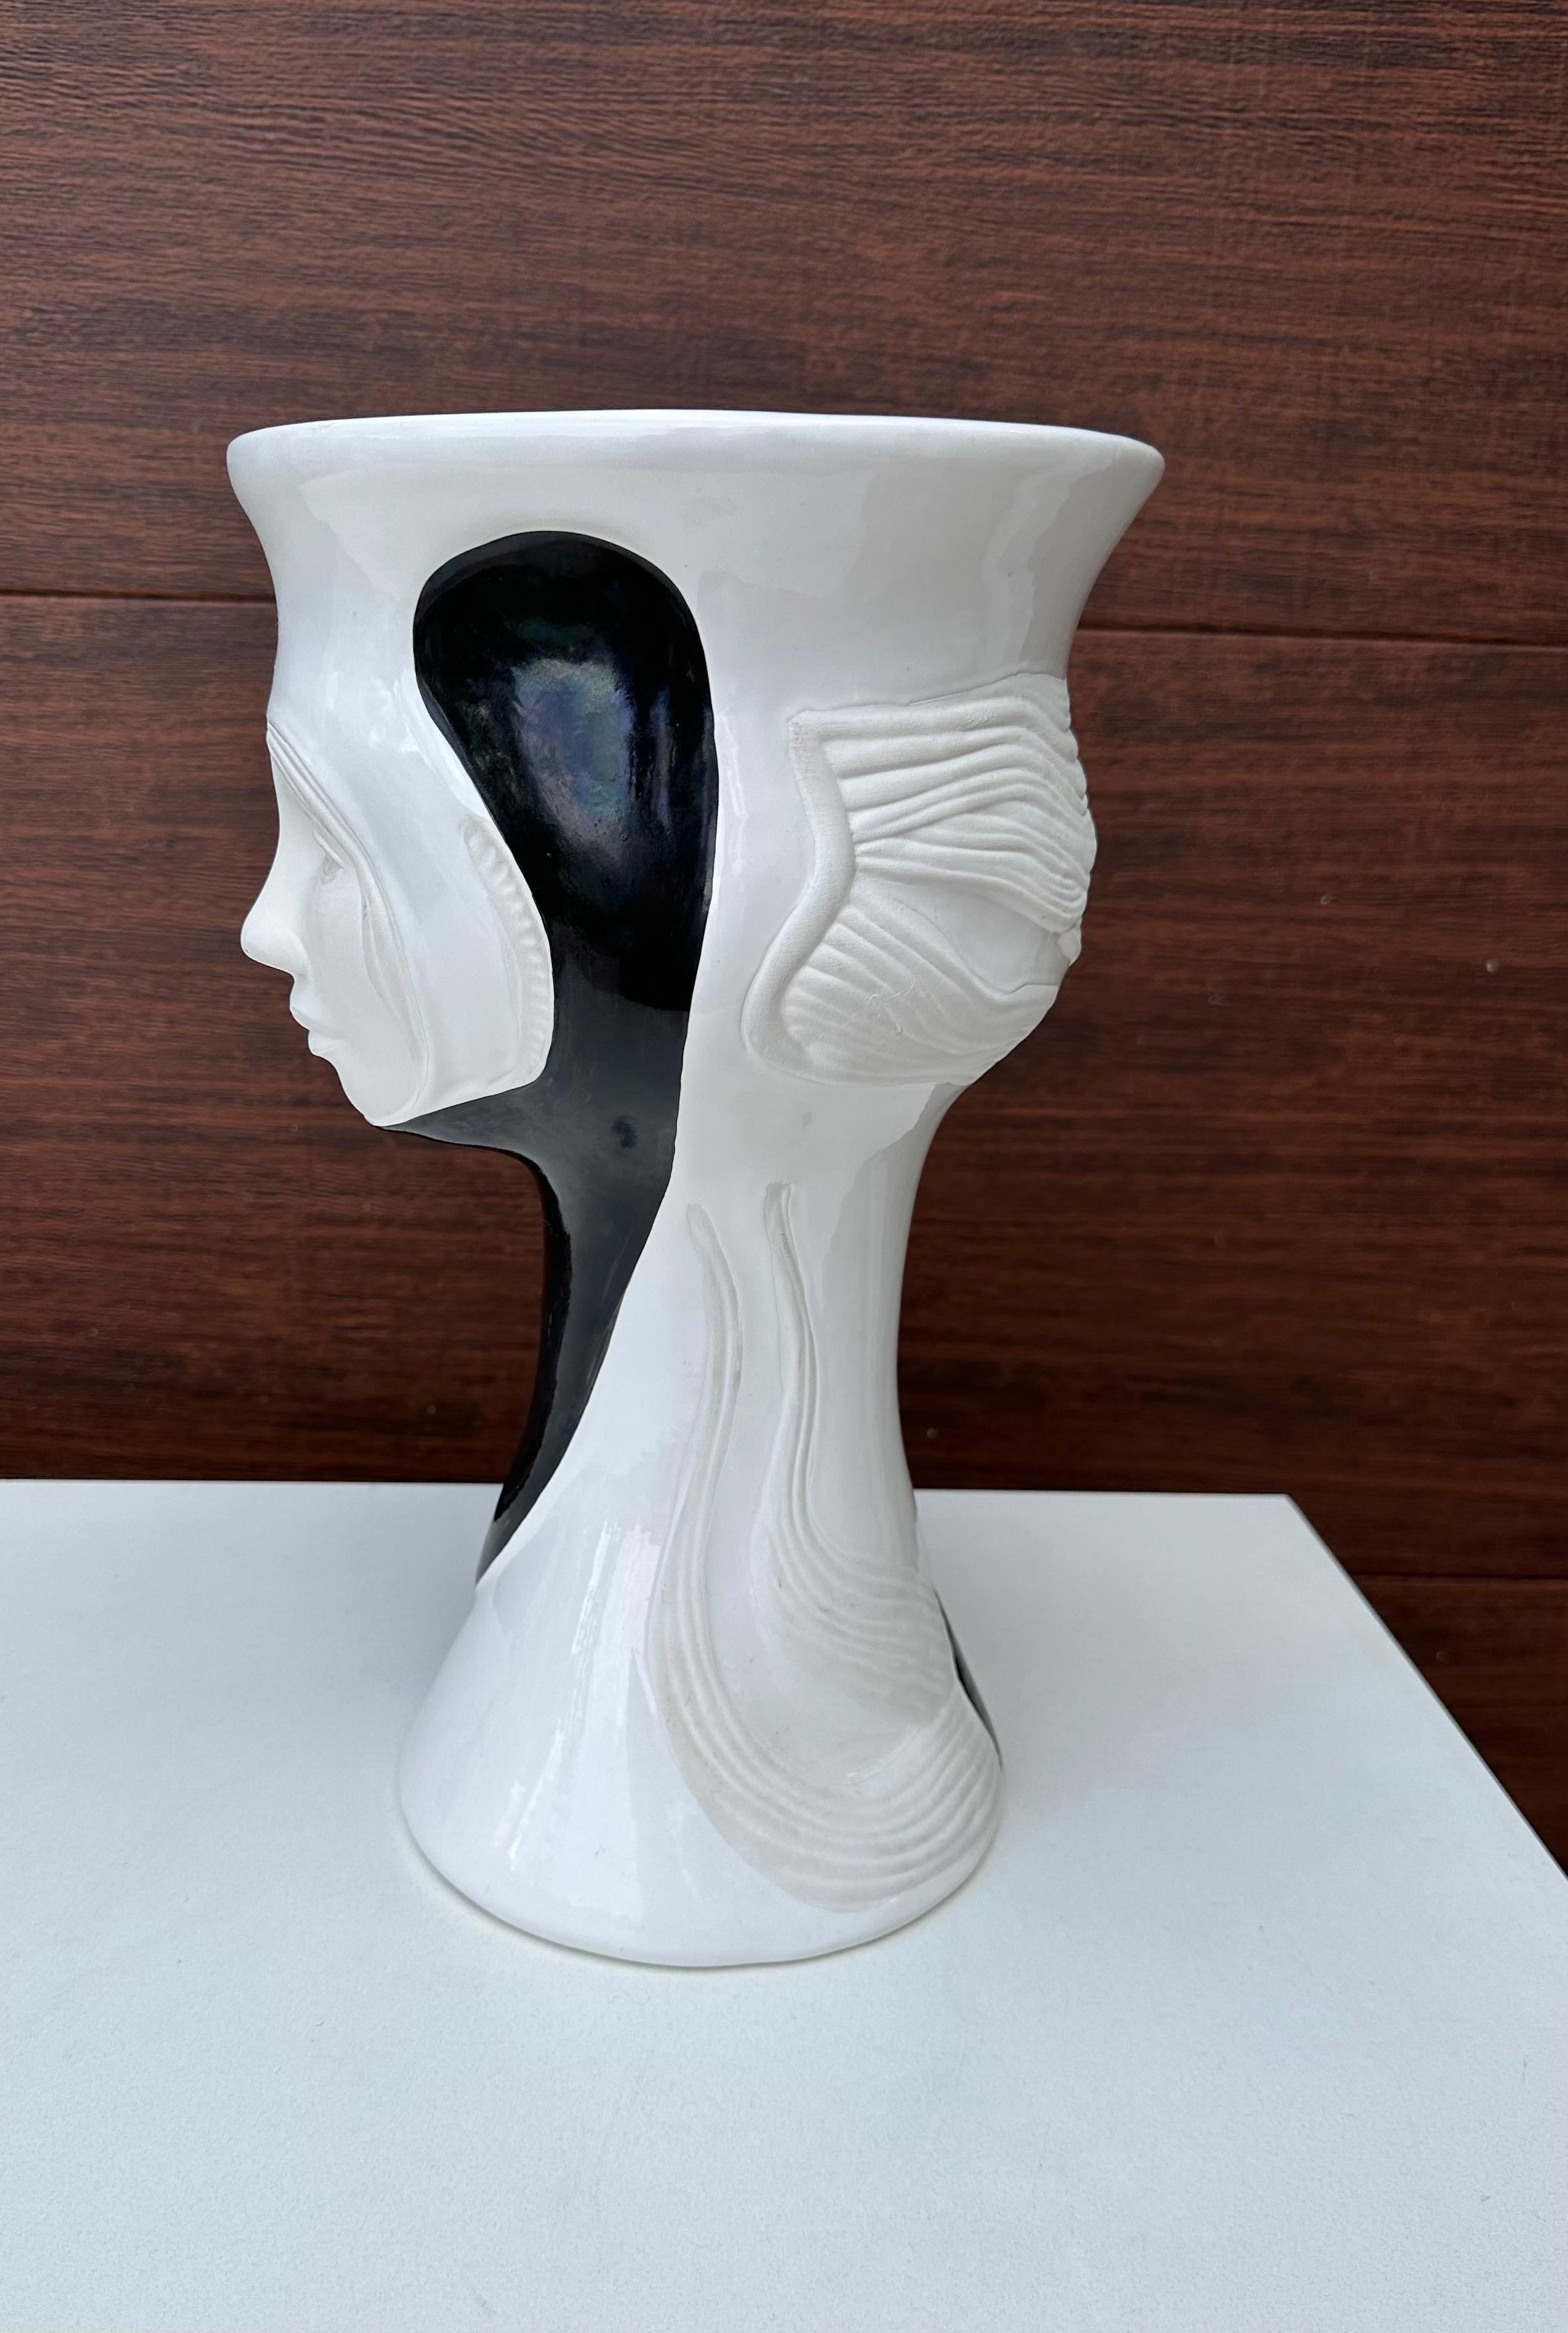 This Paolo Marioni sculptural face vase is a unique addition to any collection. Made in Italy during the post-modern era, this vase showcases intricate details that make it a true work of art. Its design is inspired by human faces and features,